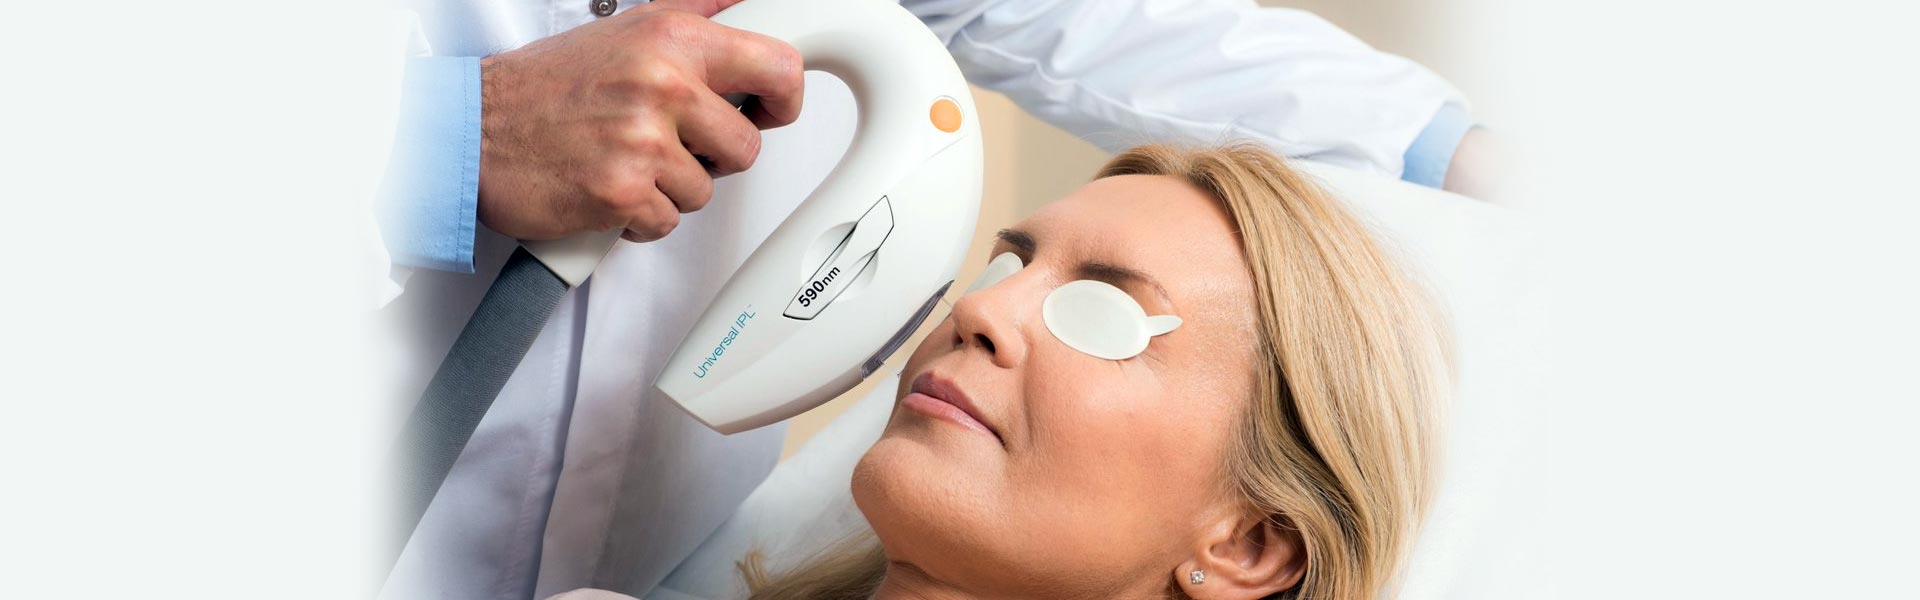 Intense Pulsed Light Therapy (IPL) for Dry Eye Disease